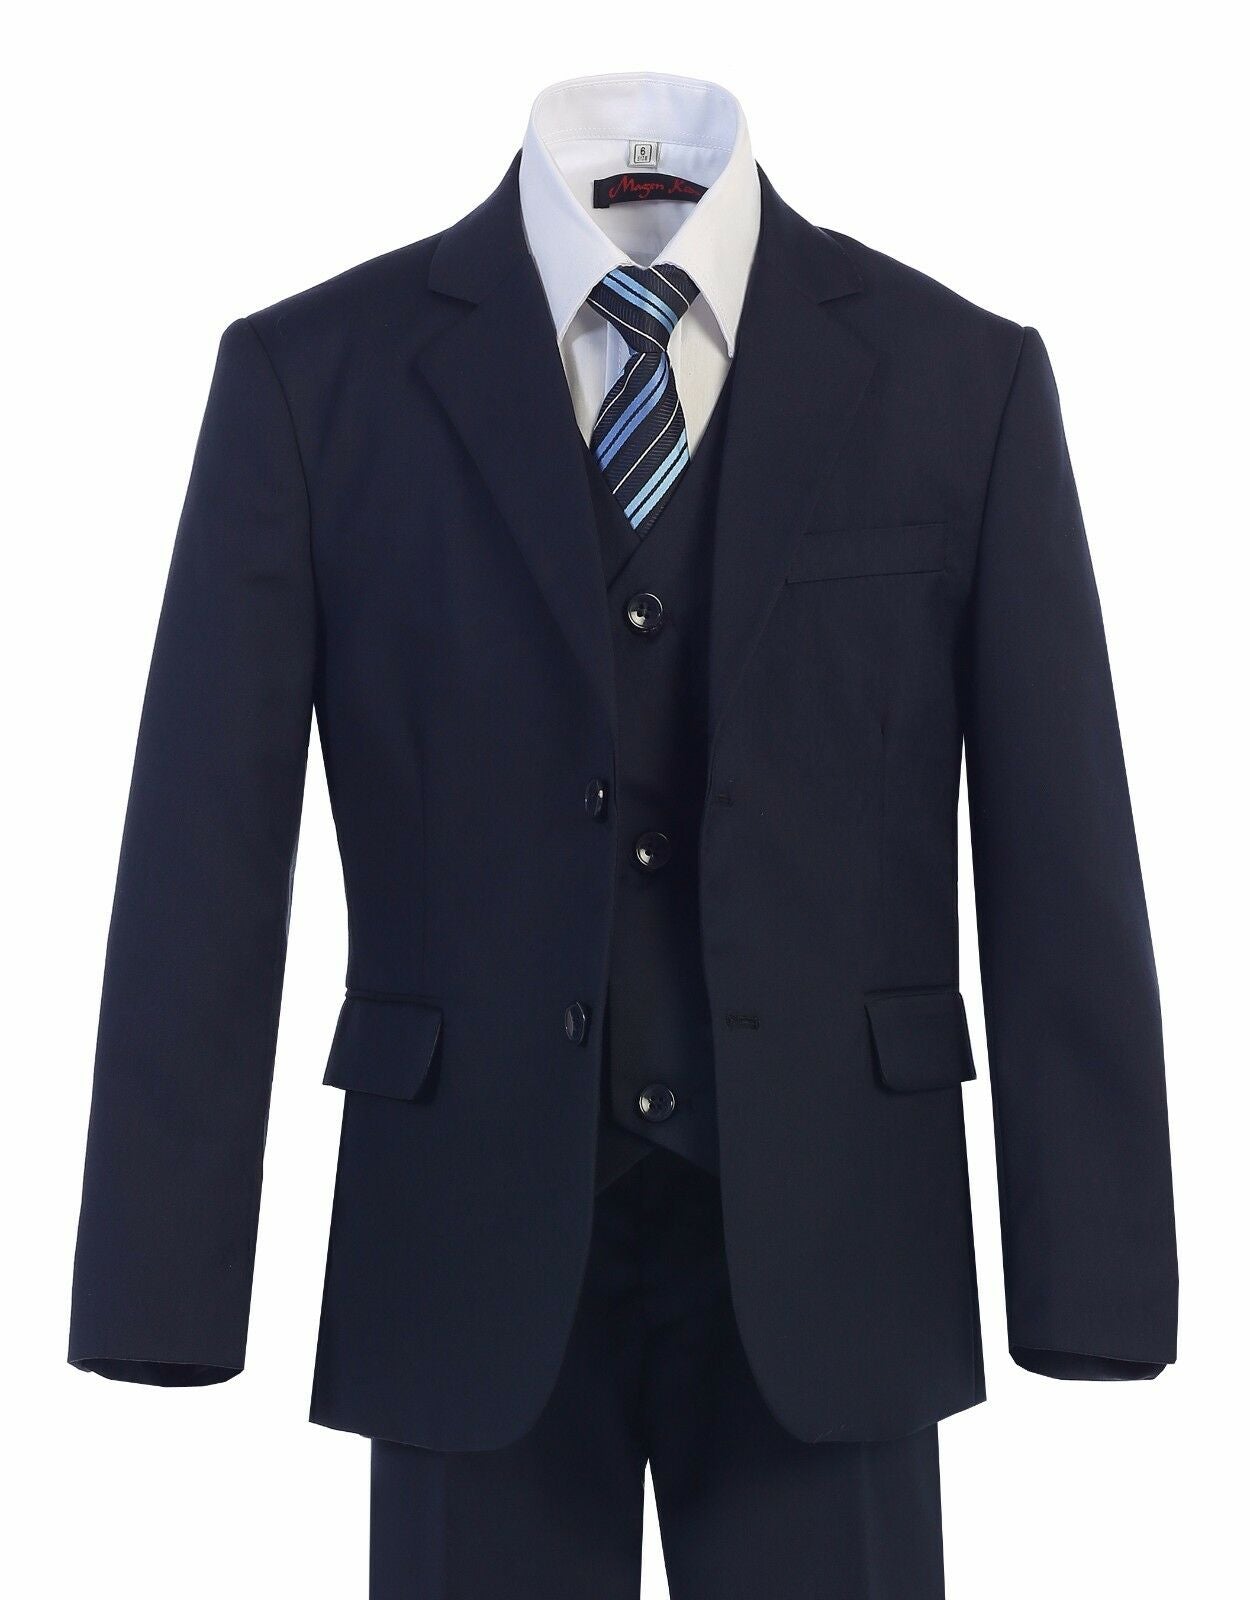 A young gentleman shines in the sophisticated Executive Navy Suit.